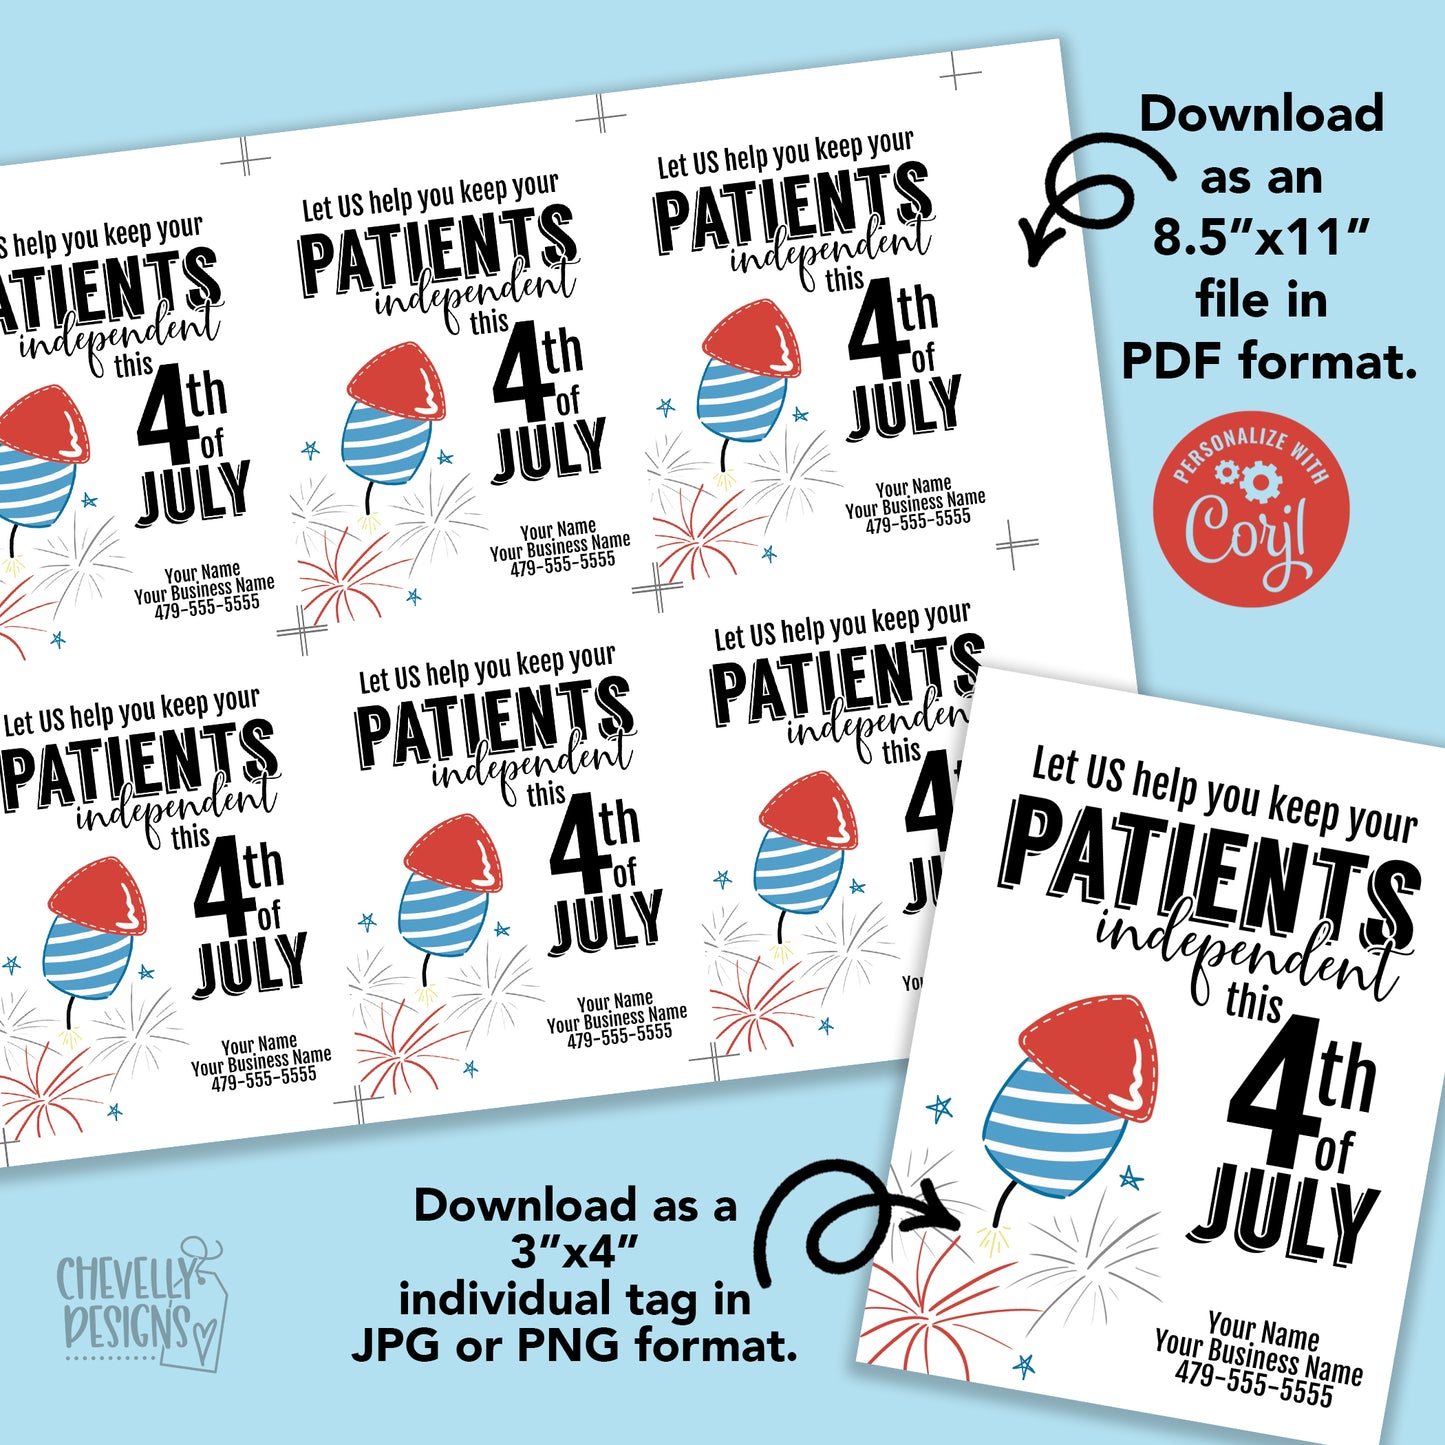 Editable - 4th of July Patient Care Tags - Business Referral Marketing - Printable Digital File